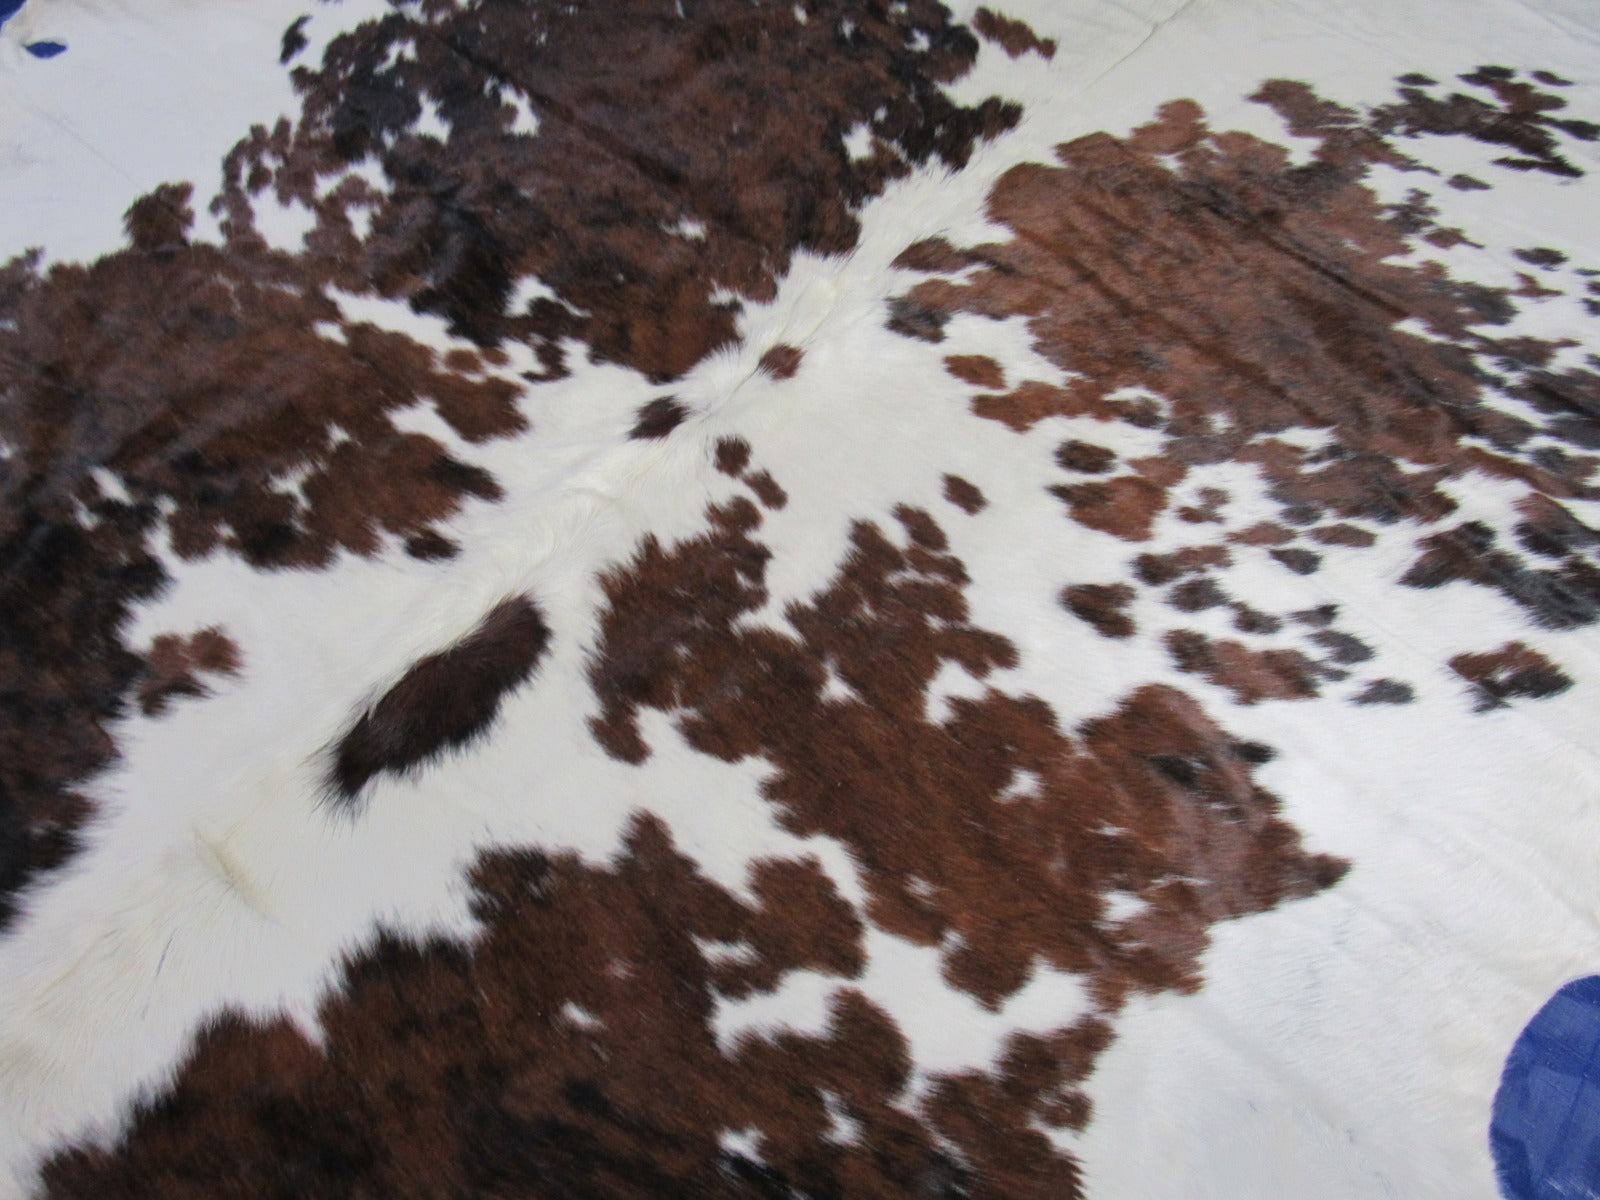 Speckled Tricolor Cowhide Rug (untrimmed) - Size: 8x8 feet M-1538